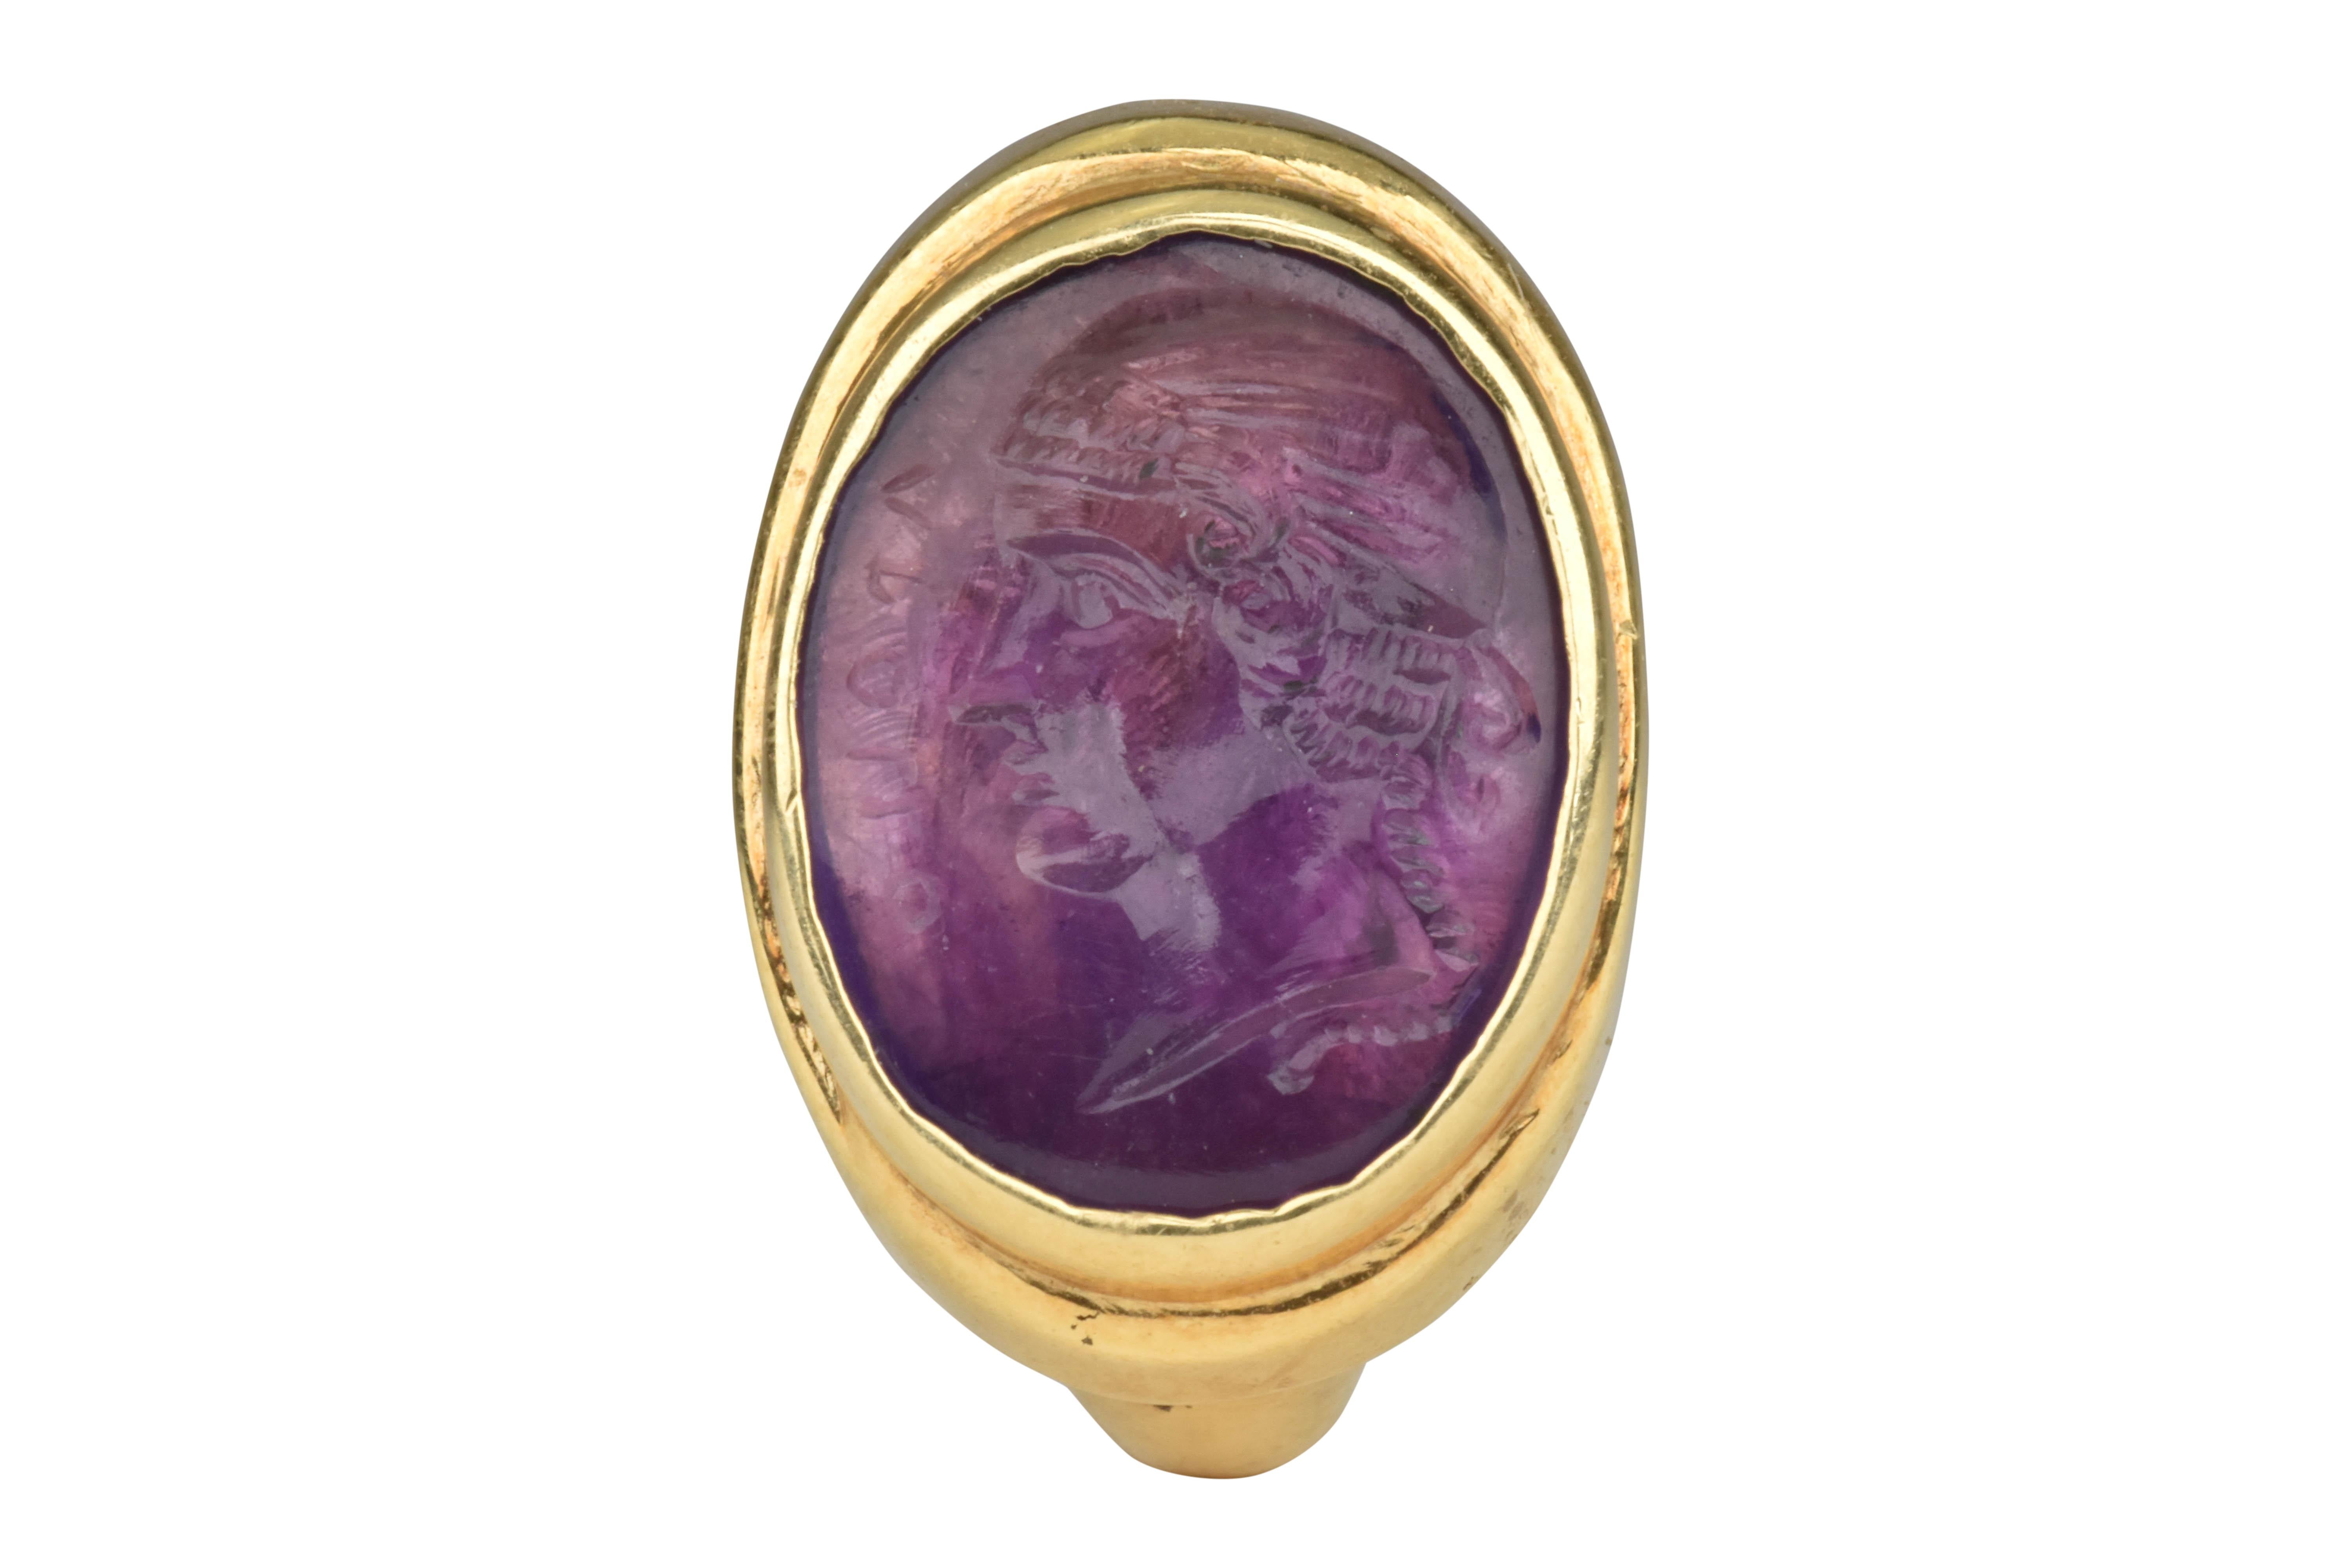 Ancient Roman Portrait Amethyst Intaglio in a Neo-Classical Gold Signet Ring

Ca. 100 AD (Stone), Ca. 1900 AD (Ring), An Ancient Roman amethyst intaglio featuring the depiction of a female bust seen in a left profile. The figure is portrayed with a